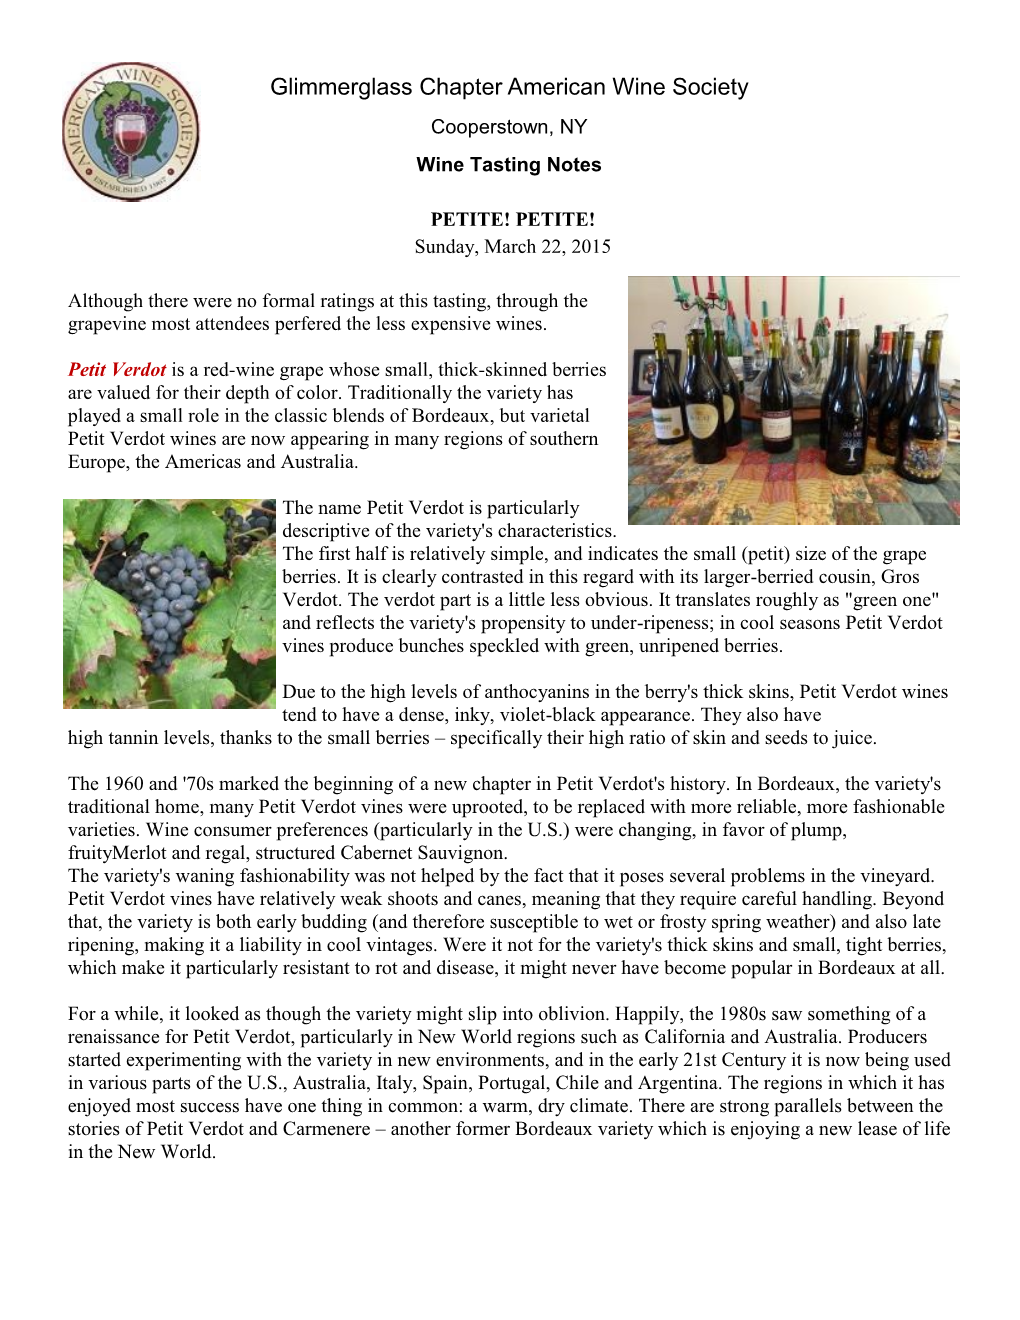 Glimmerglass Chapter American Wine Society Cooperstown, NY Wine Tasting Notes